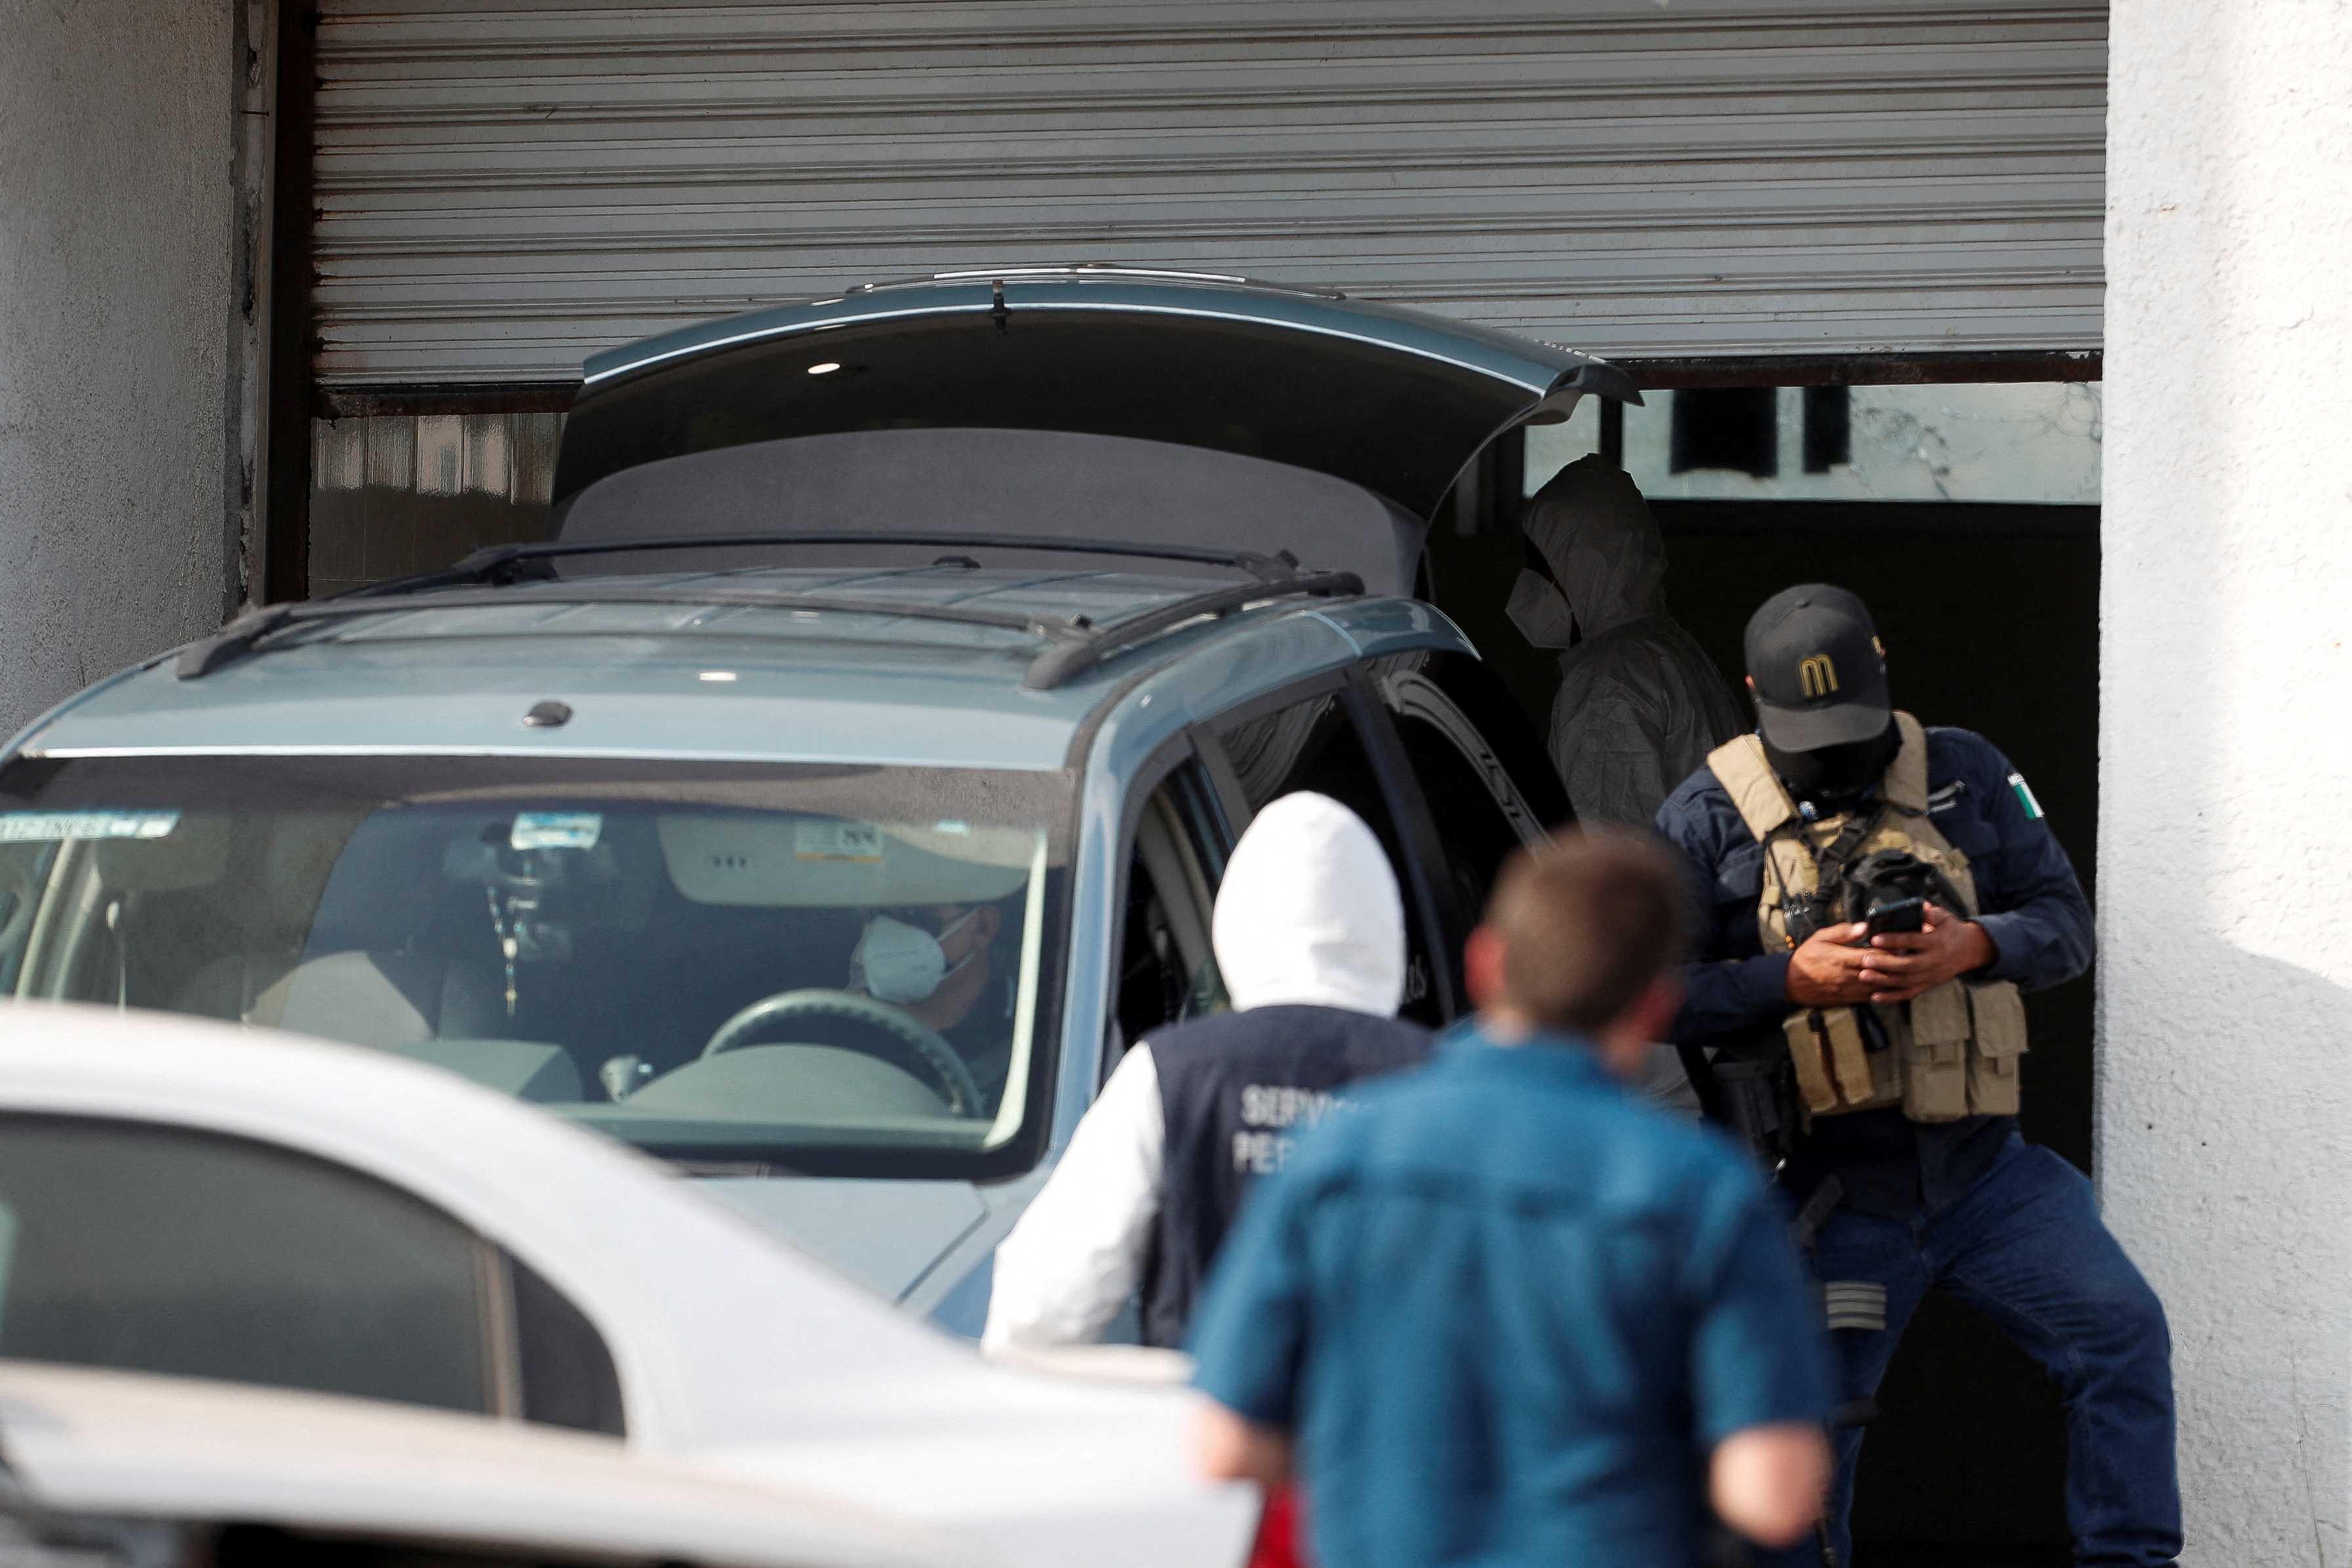 Forensic technicians load the body of an American kidnapped by gunmen into a vehicle to be transported to the US border, outside the Forensic Medical Service morgue building, in Matamoros, Mexico, March 9. Photo: Reuters